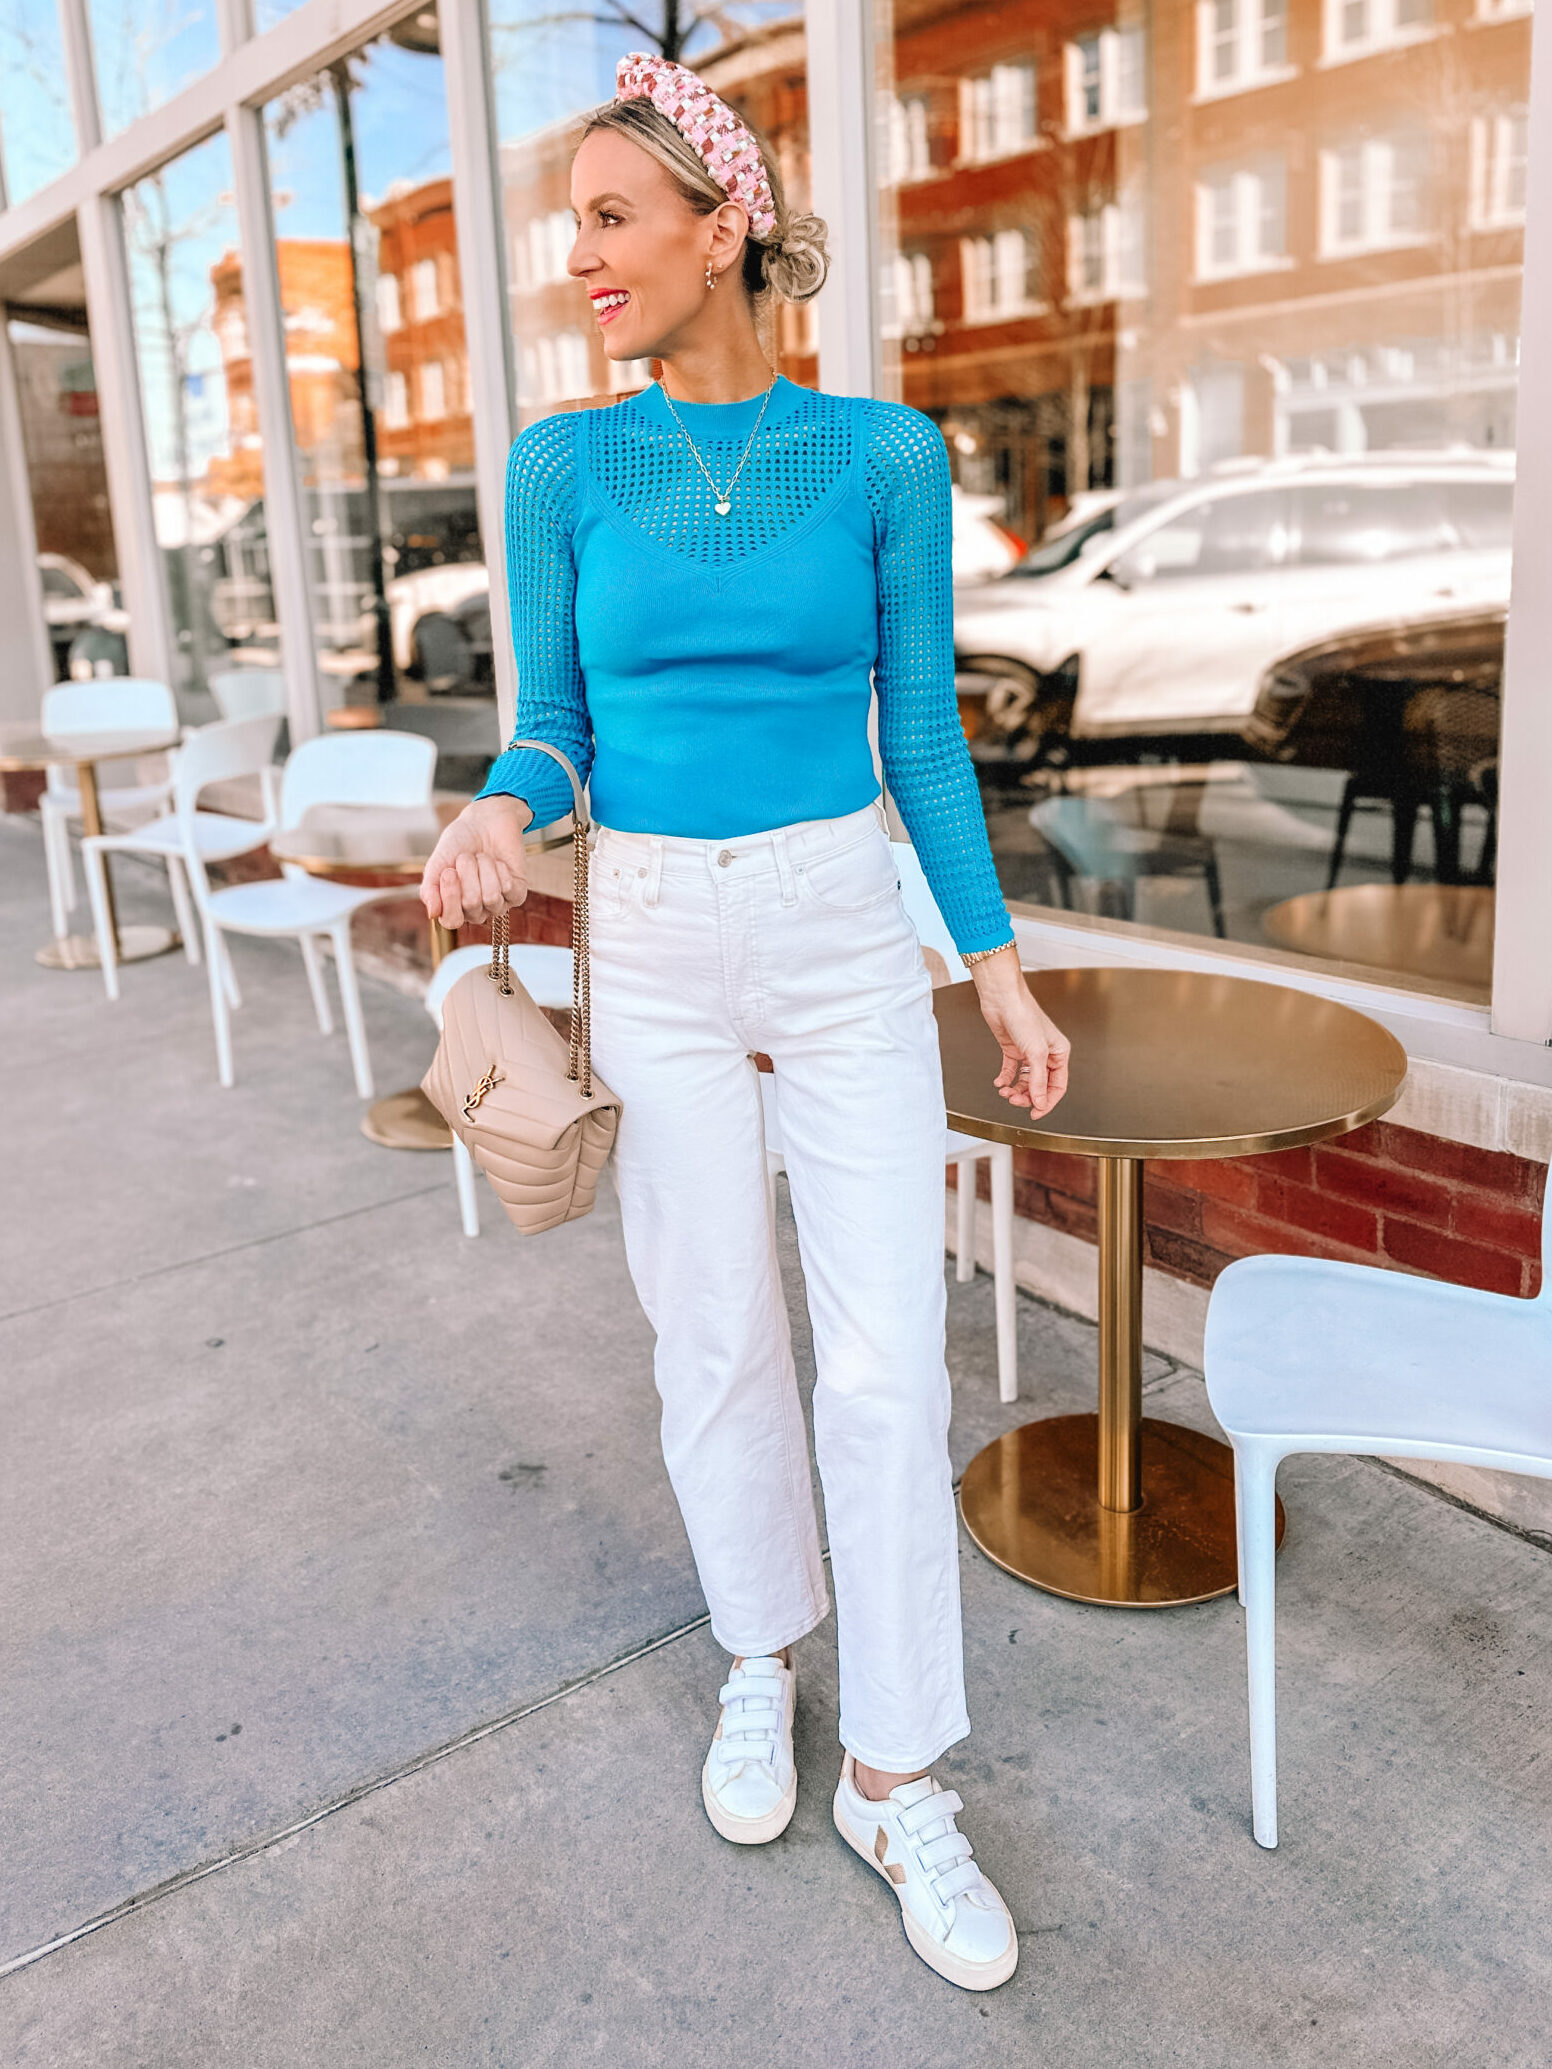 You will love this styled spring outfit with this gorgeous $22 light knit sweater with the perforated detail. 